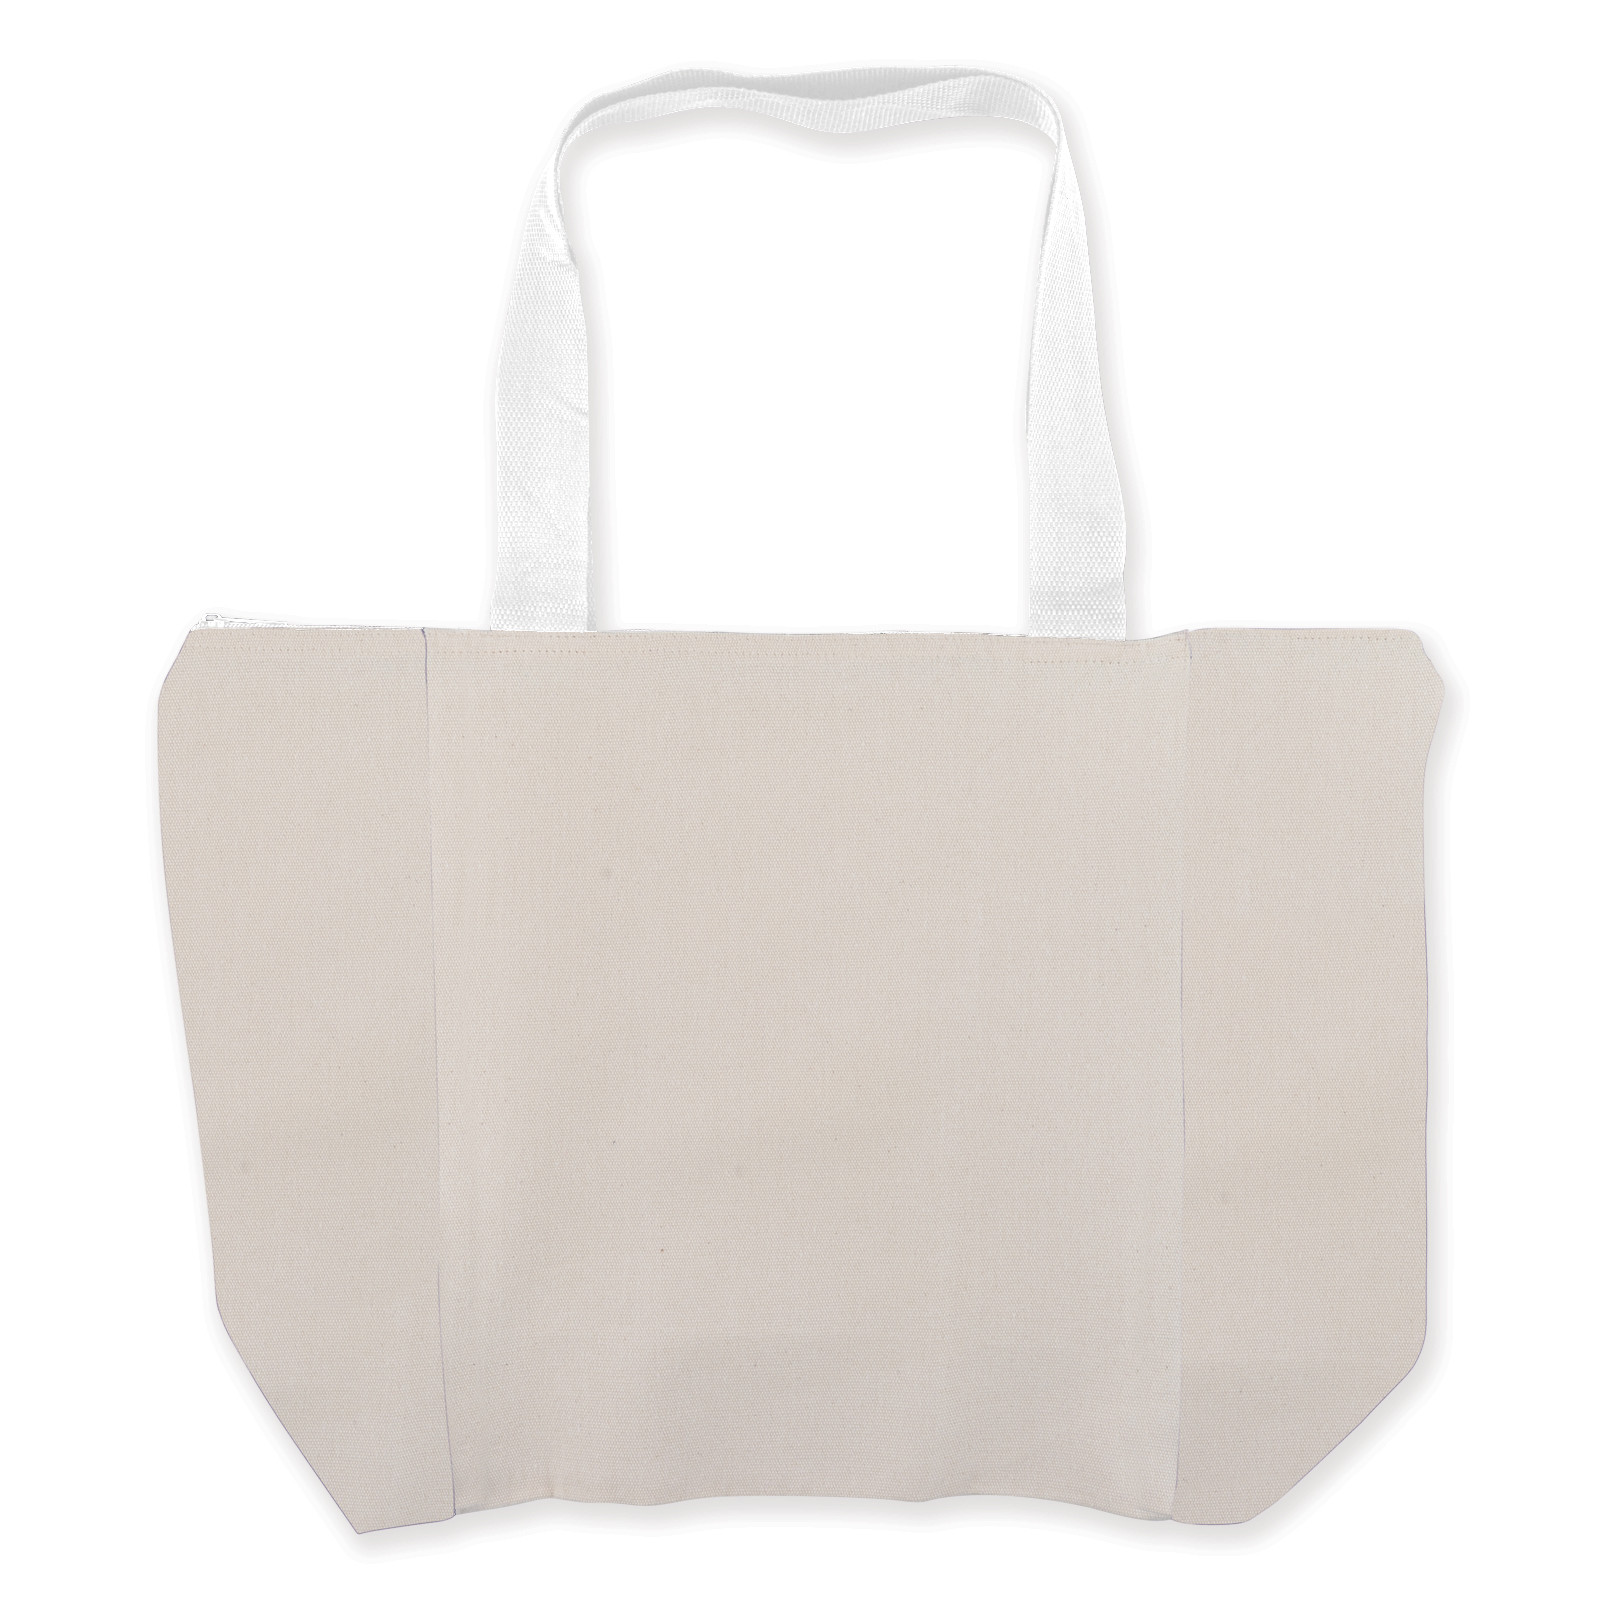 LL525 Carry All Calico Zip Grocery Bag - 305 GSM